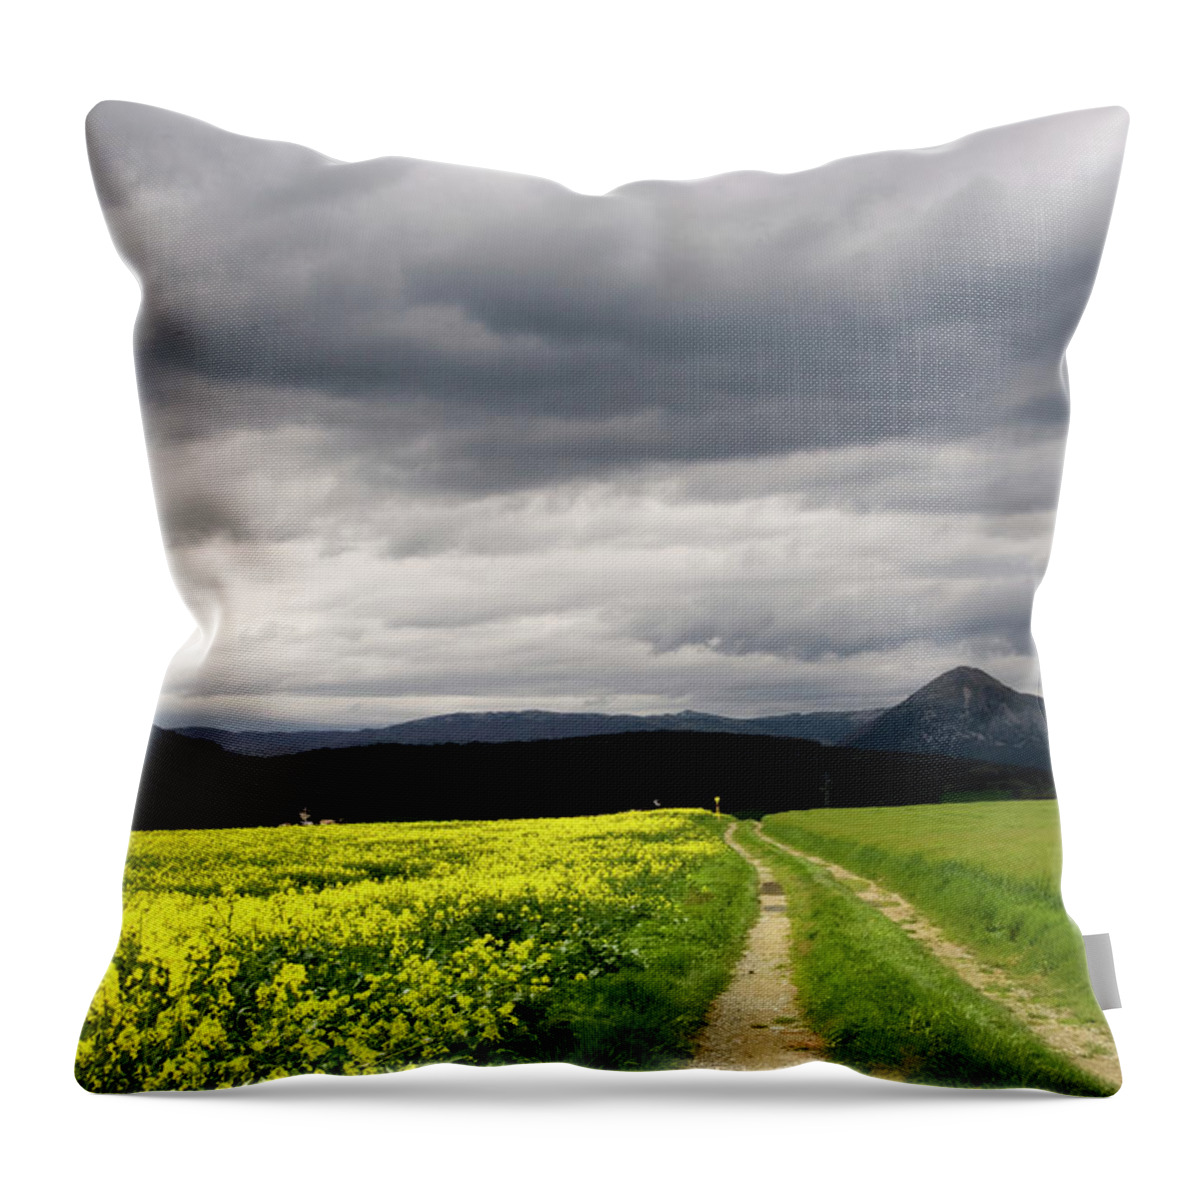 Scenics Throw Pillow featuring the photograph Spring Under Clouds by I. Lizarraga